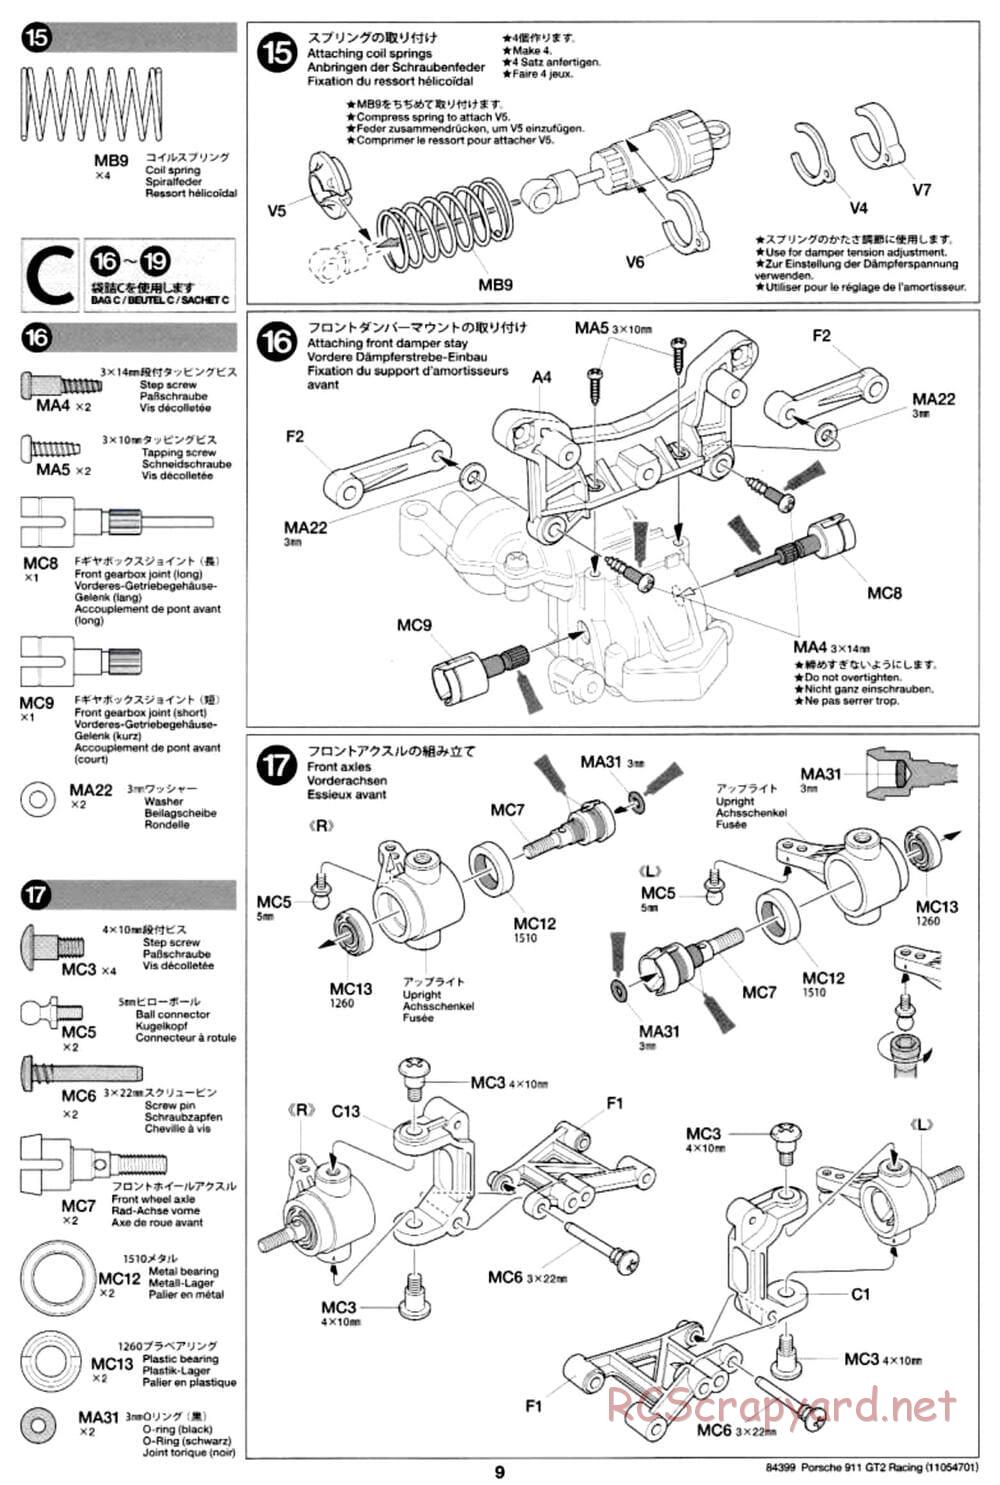 Tamiya - Porsche 911 GT2 Racing - TA02SW Chassis - Manual - Page 9